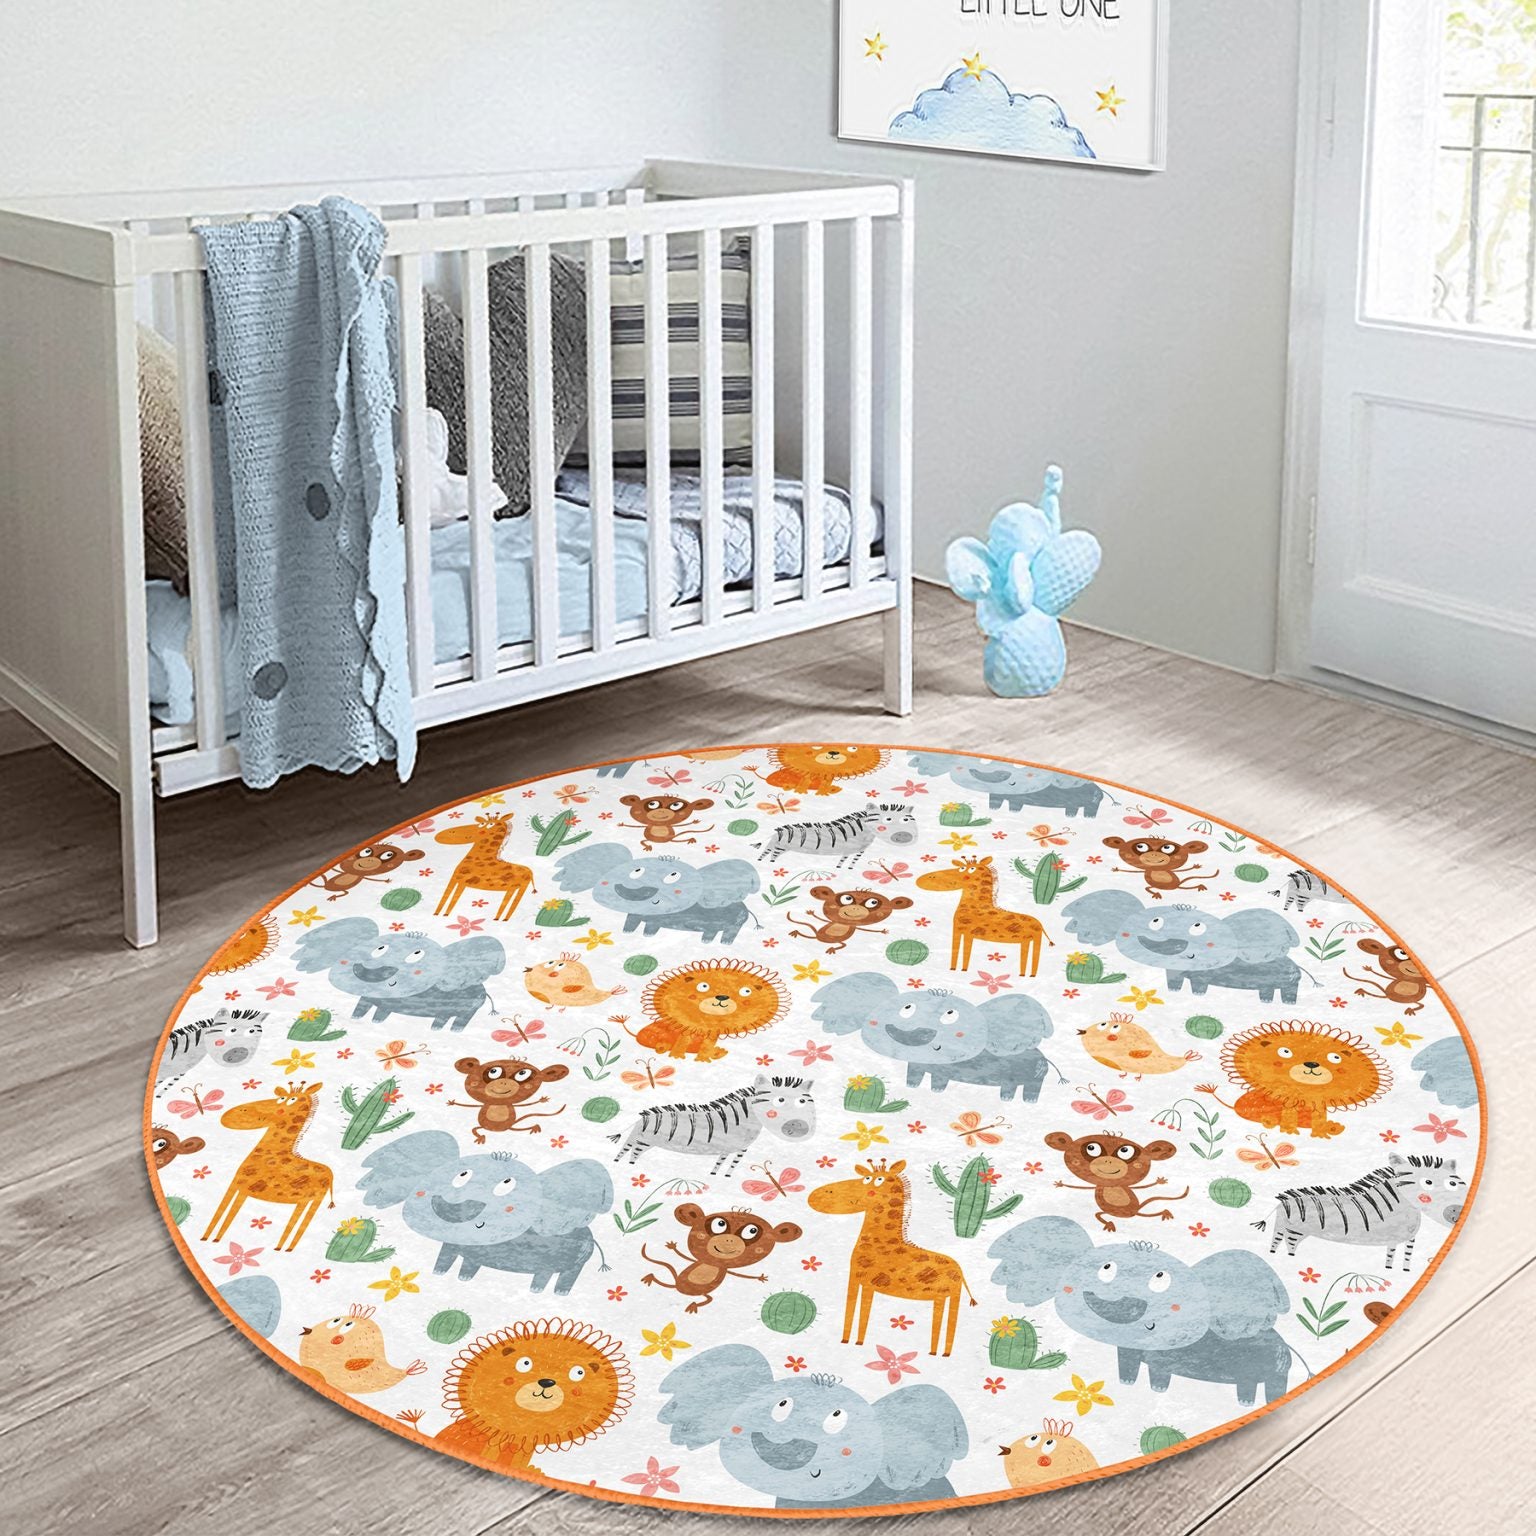 Whimsically Designed Rug with Cute Animals for Children's Room